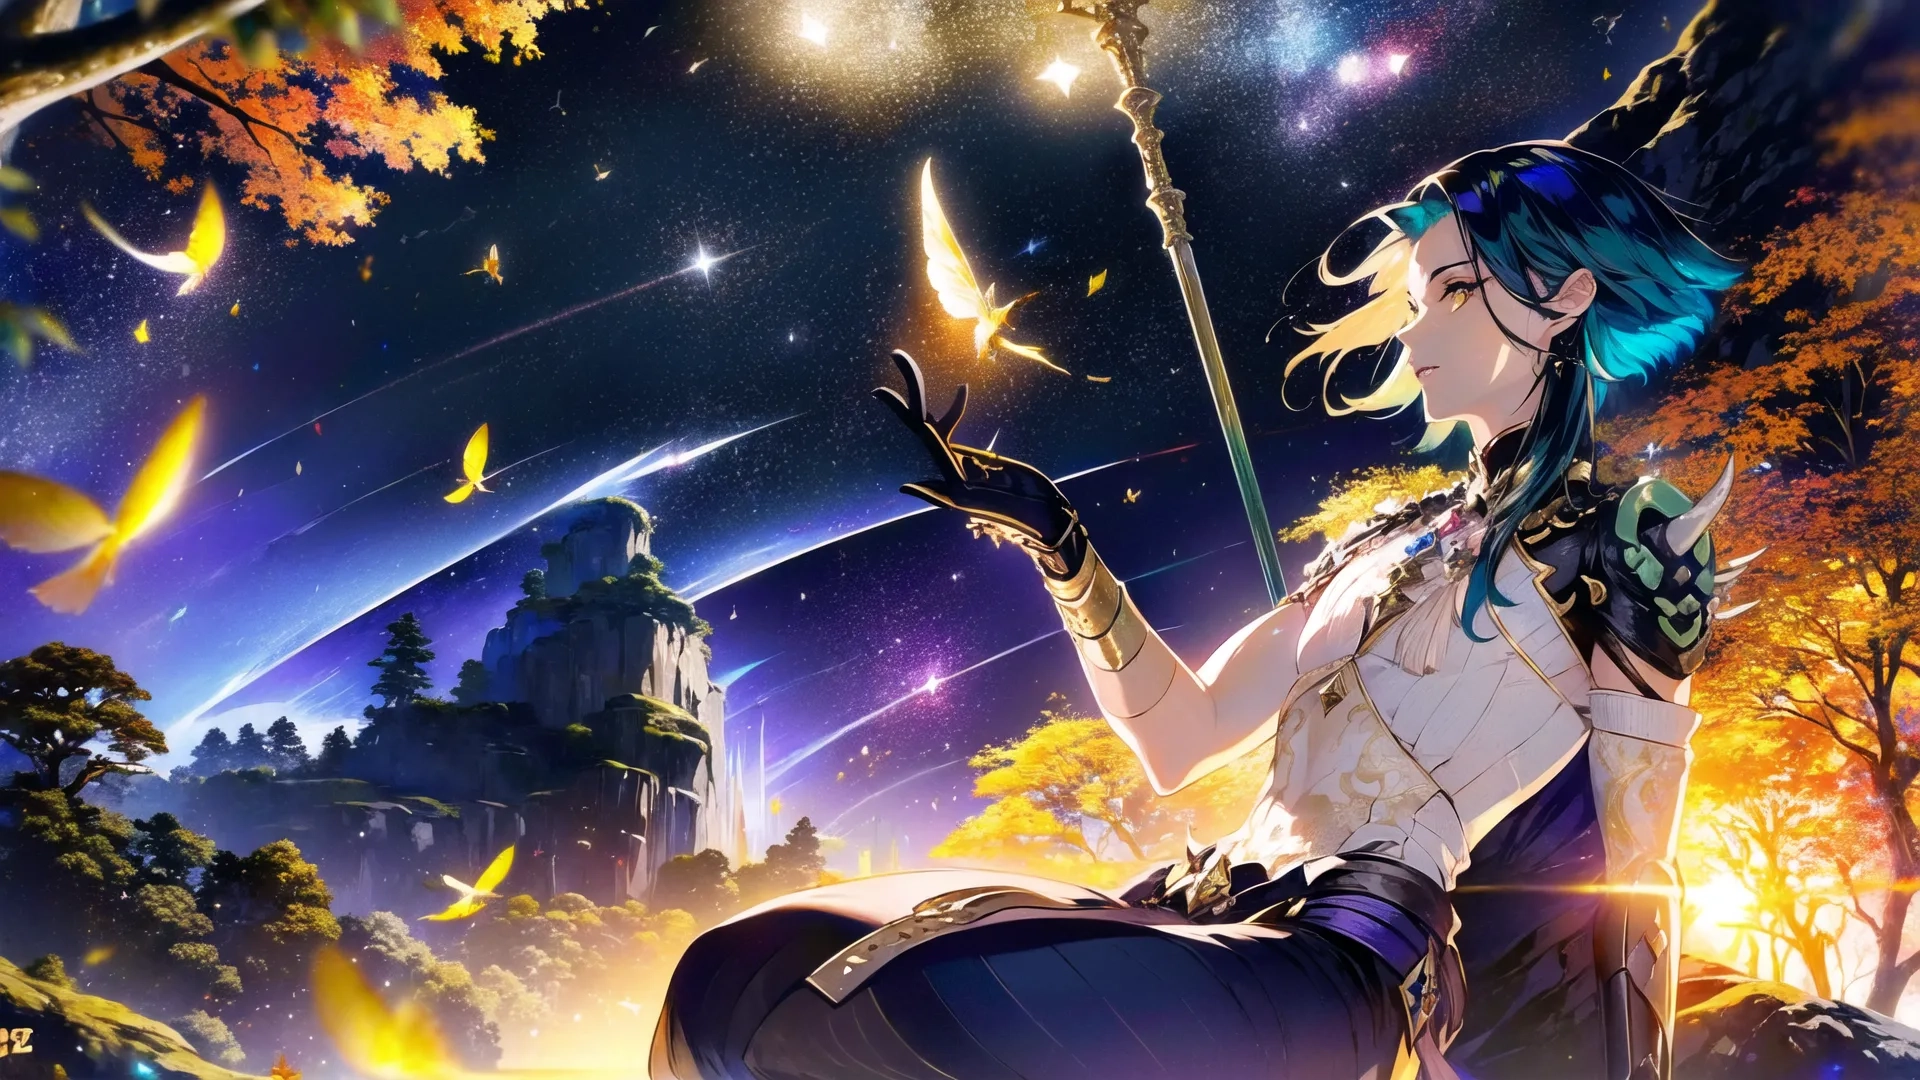 the girl with the crown is holding a sparkle wand sitting under a star formation while in the background, there is a mountain with a firework of trees and light
